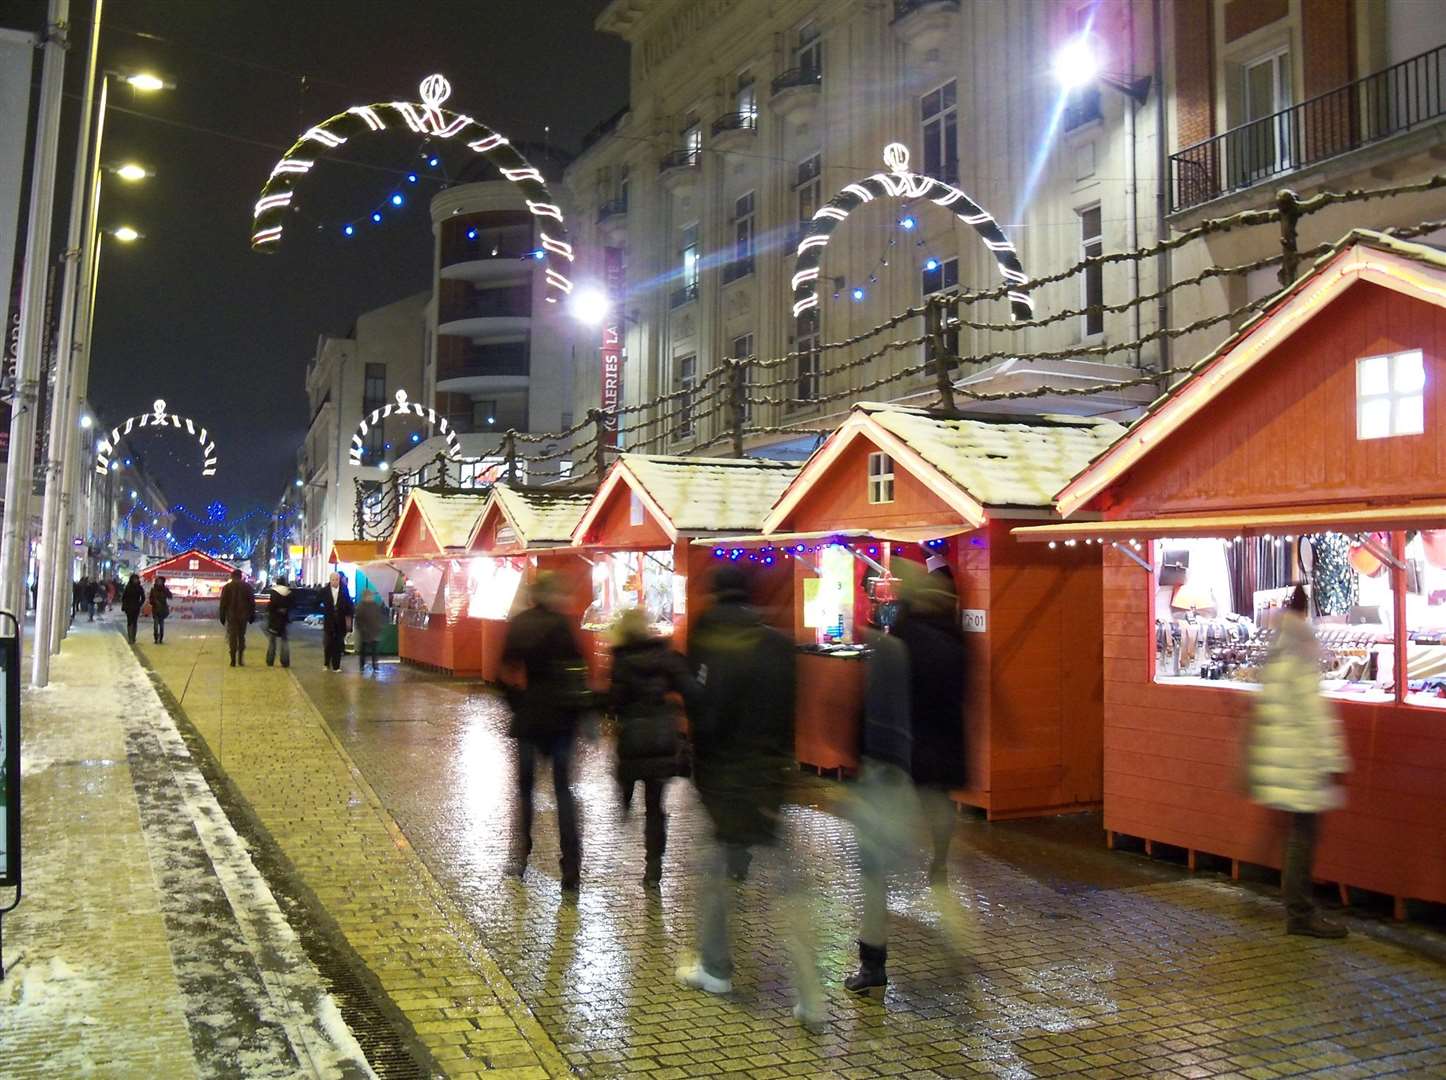 The Christmas stalls in Amiens are open every week day between 10.30am and 7pm except Mondays (from 2pm and 7pm). On Saturdays, the stalls stay open until 9pm.